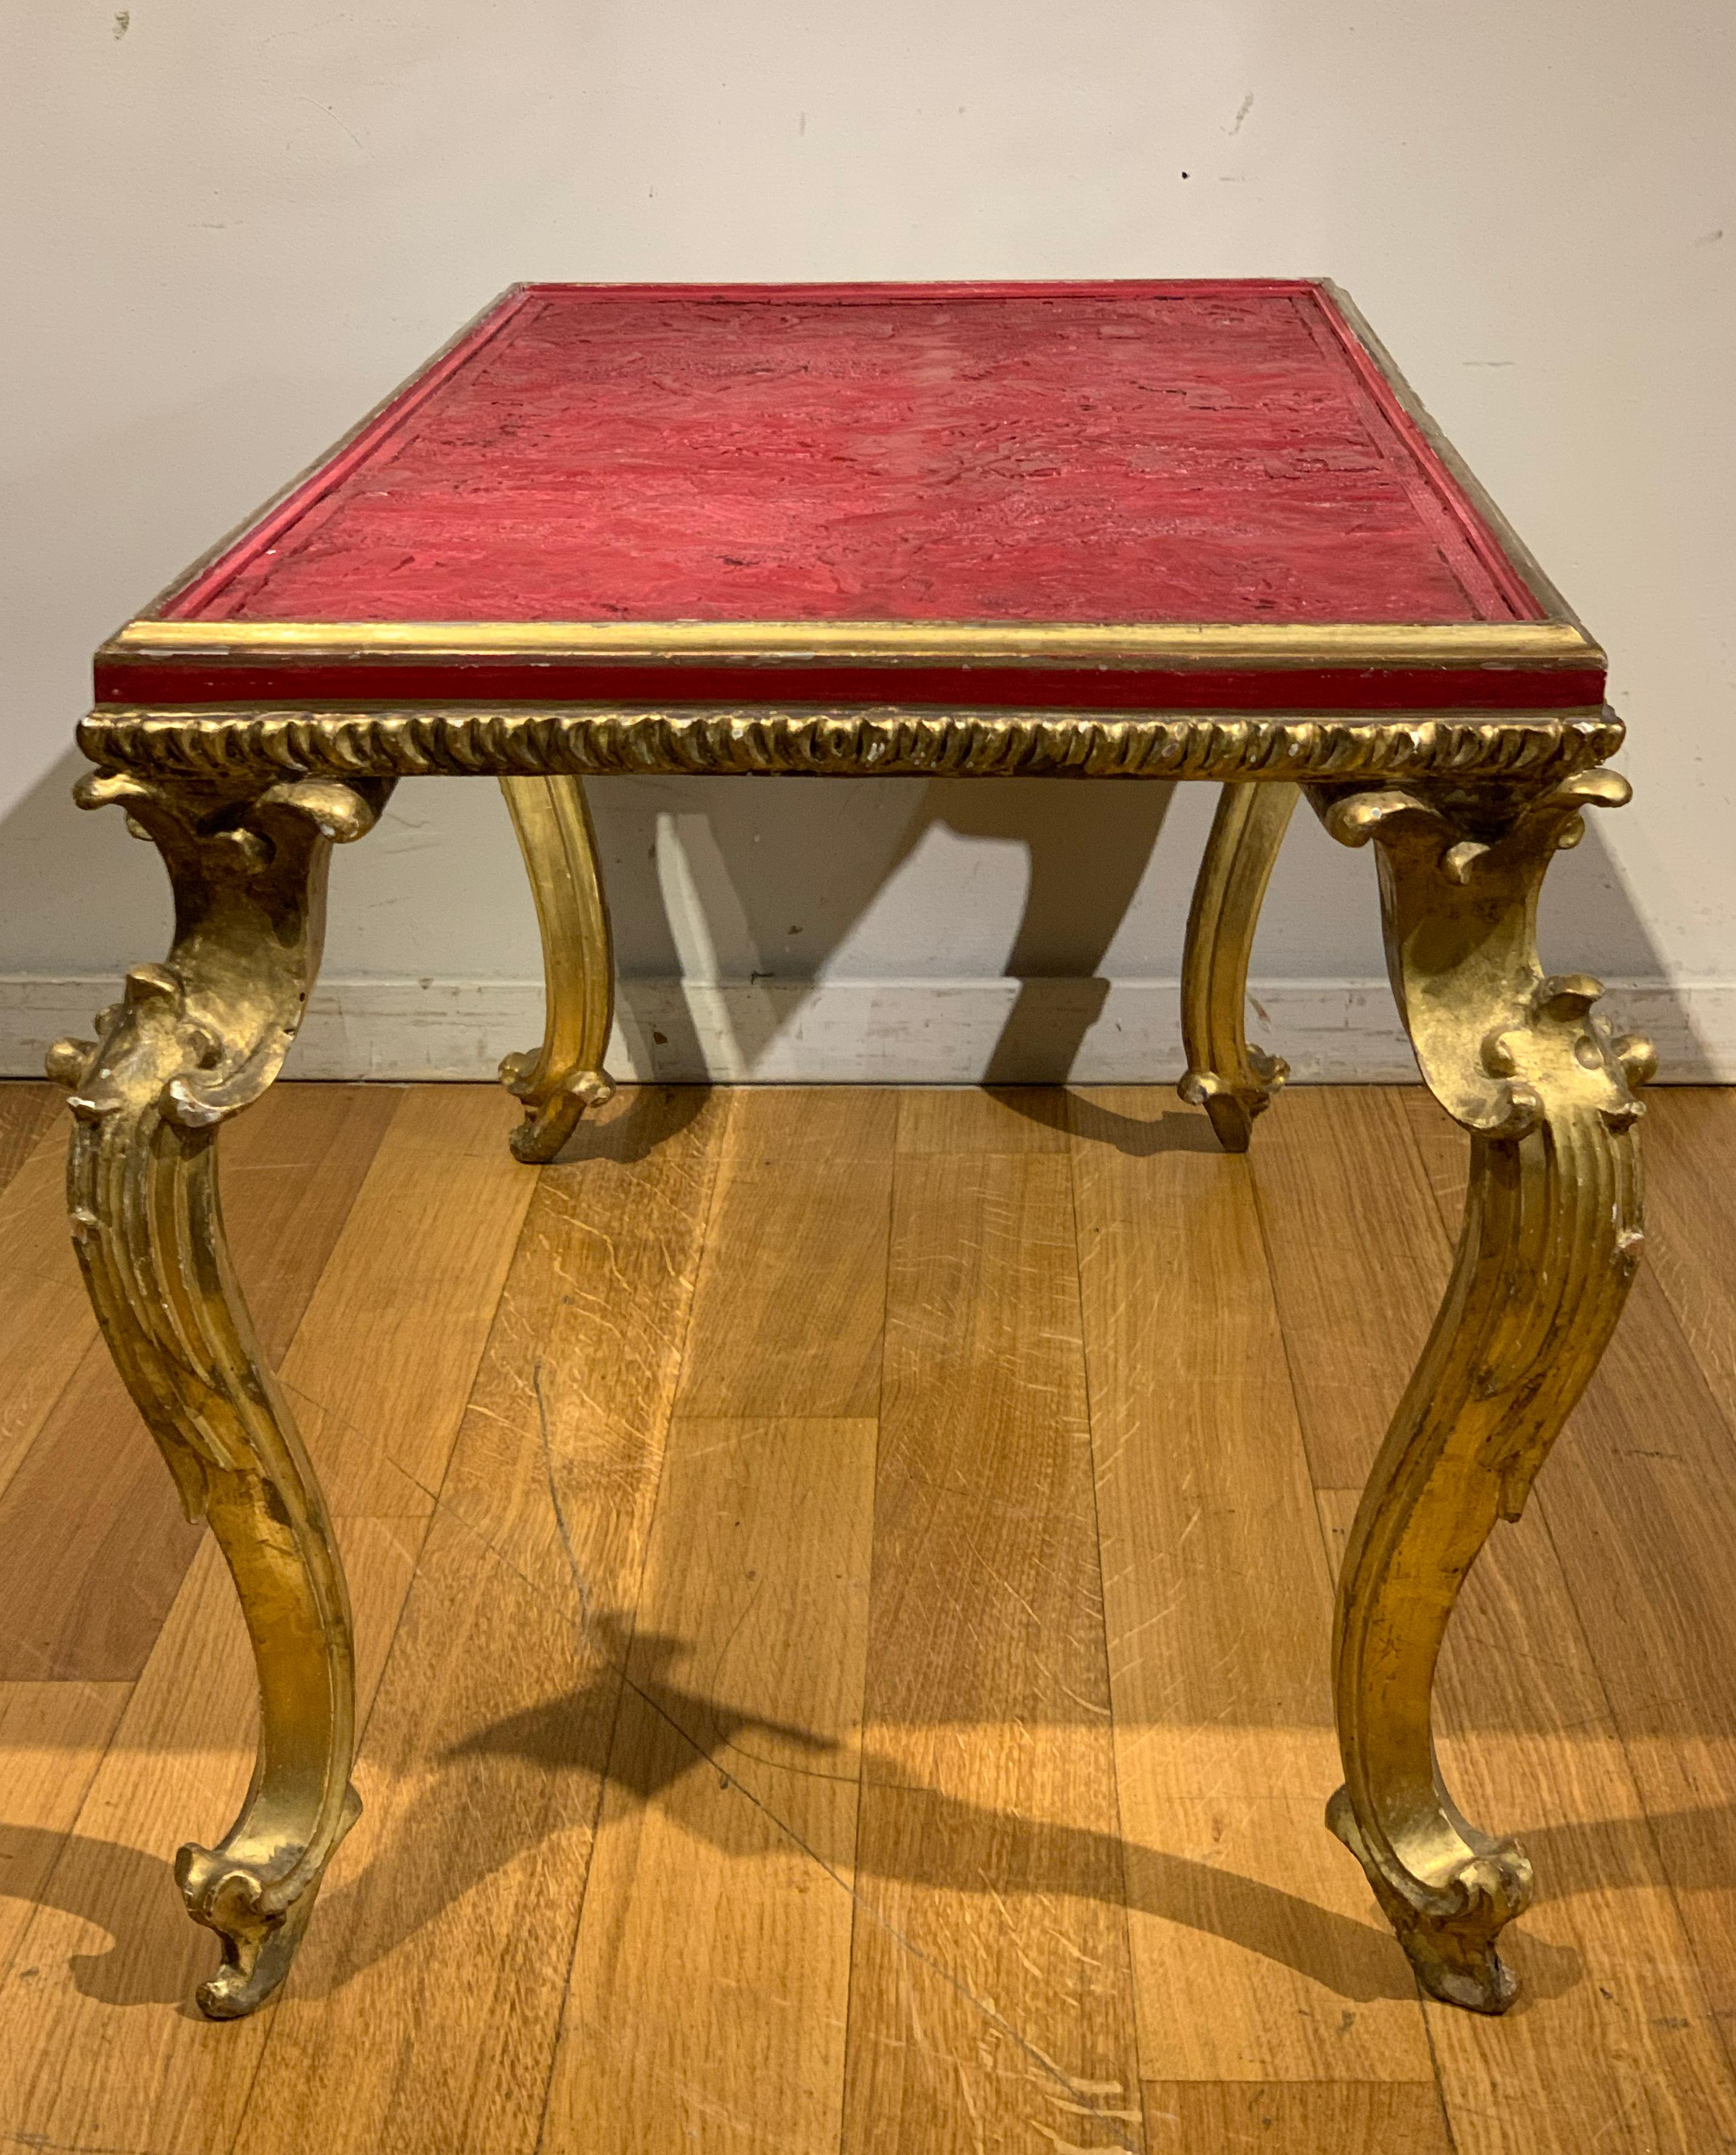 Early 19th Century Small Giltwood Table with Chinese Red Lacquer Top 2